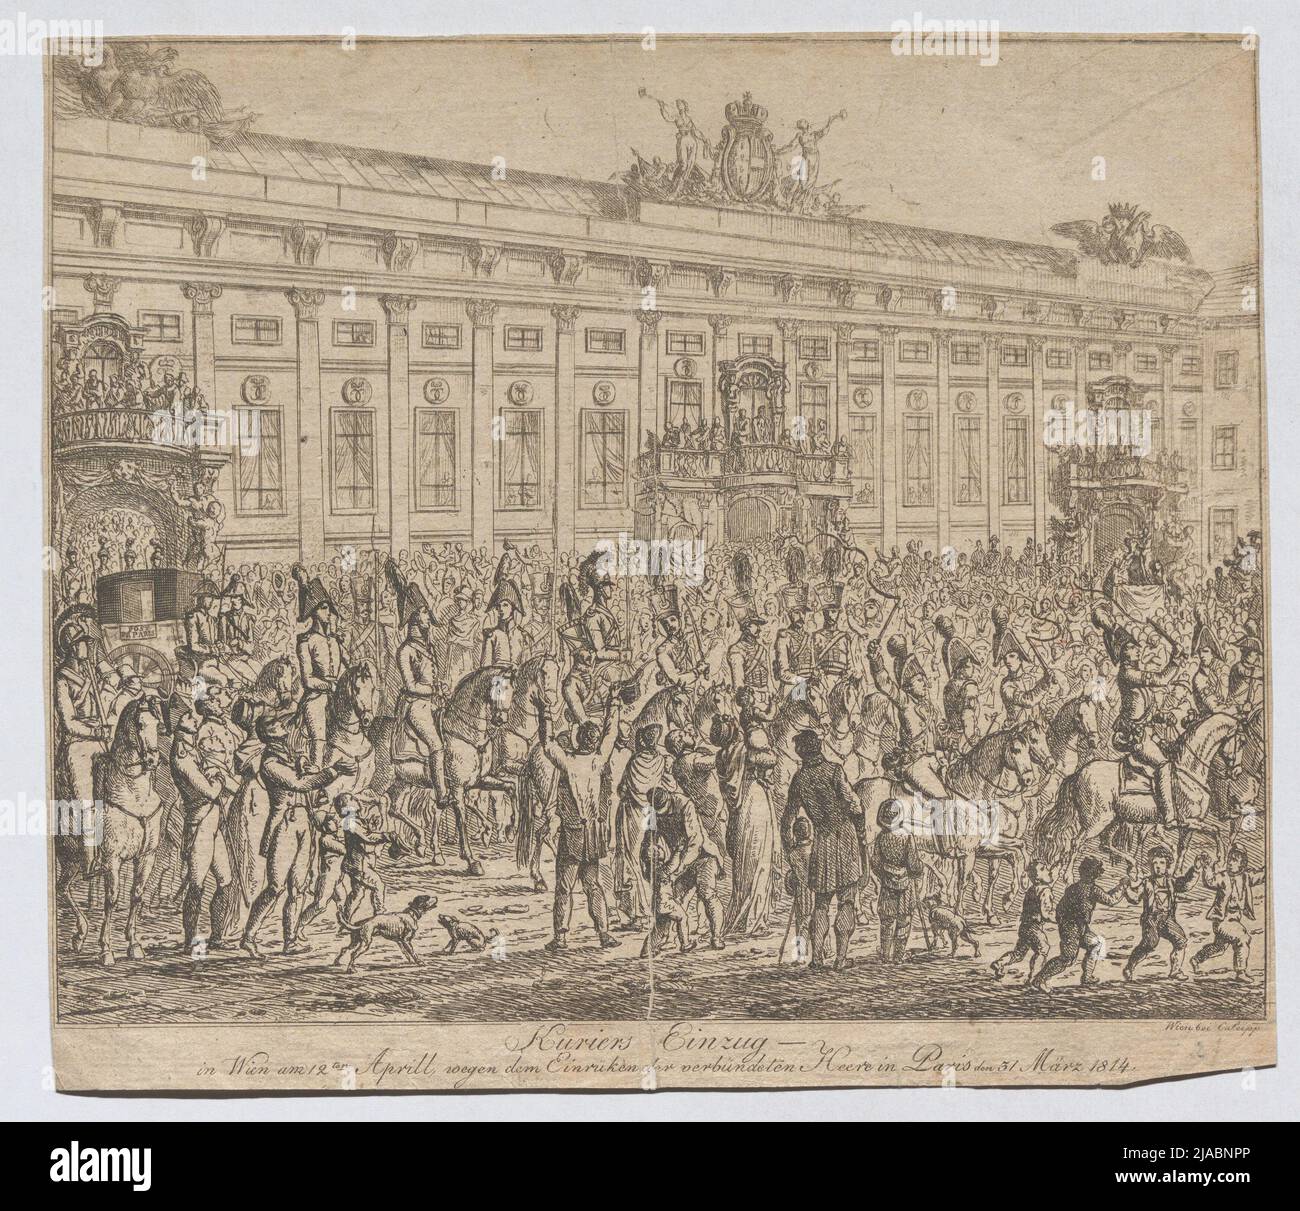 Recovery of couriers in Vienna on April 12, 1814 after the allied armies in Paris moved on March 31. C. Seipp, publisher Stock Photo